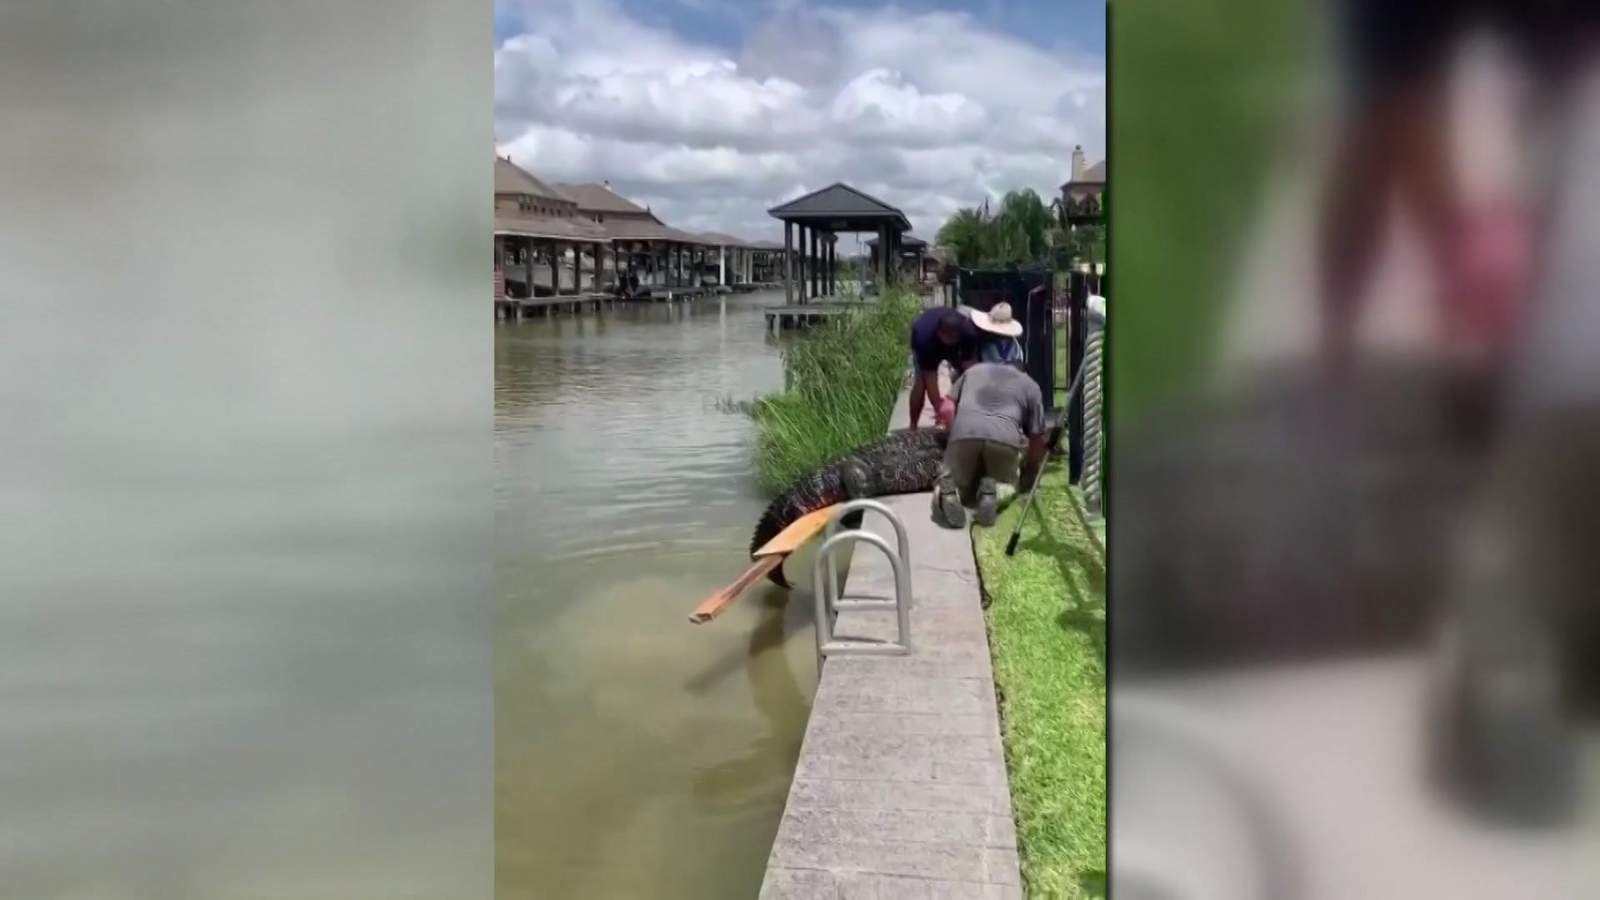 League City dad’s quick actions save 4-year-old from jaws of a massive, 11-feet alligator